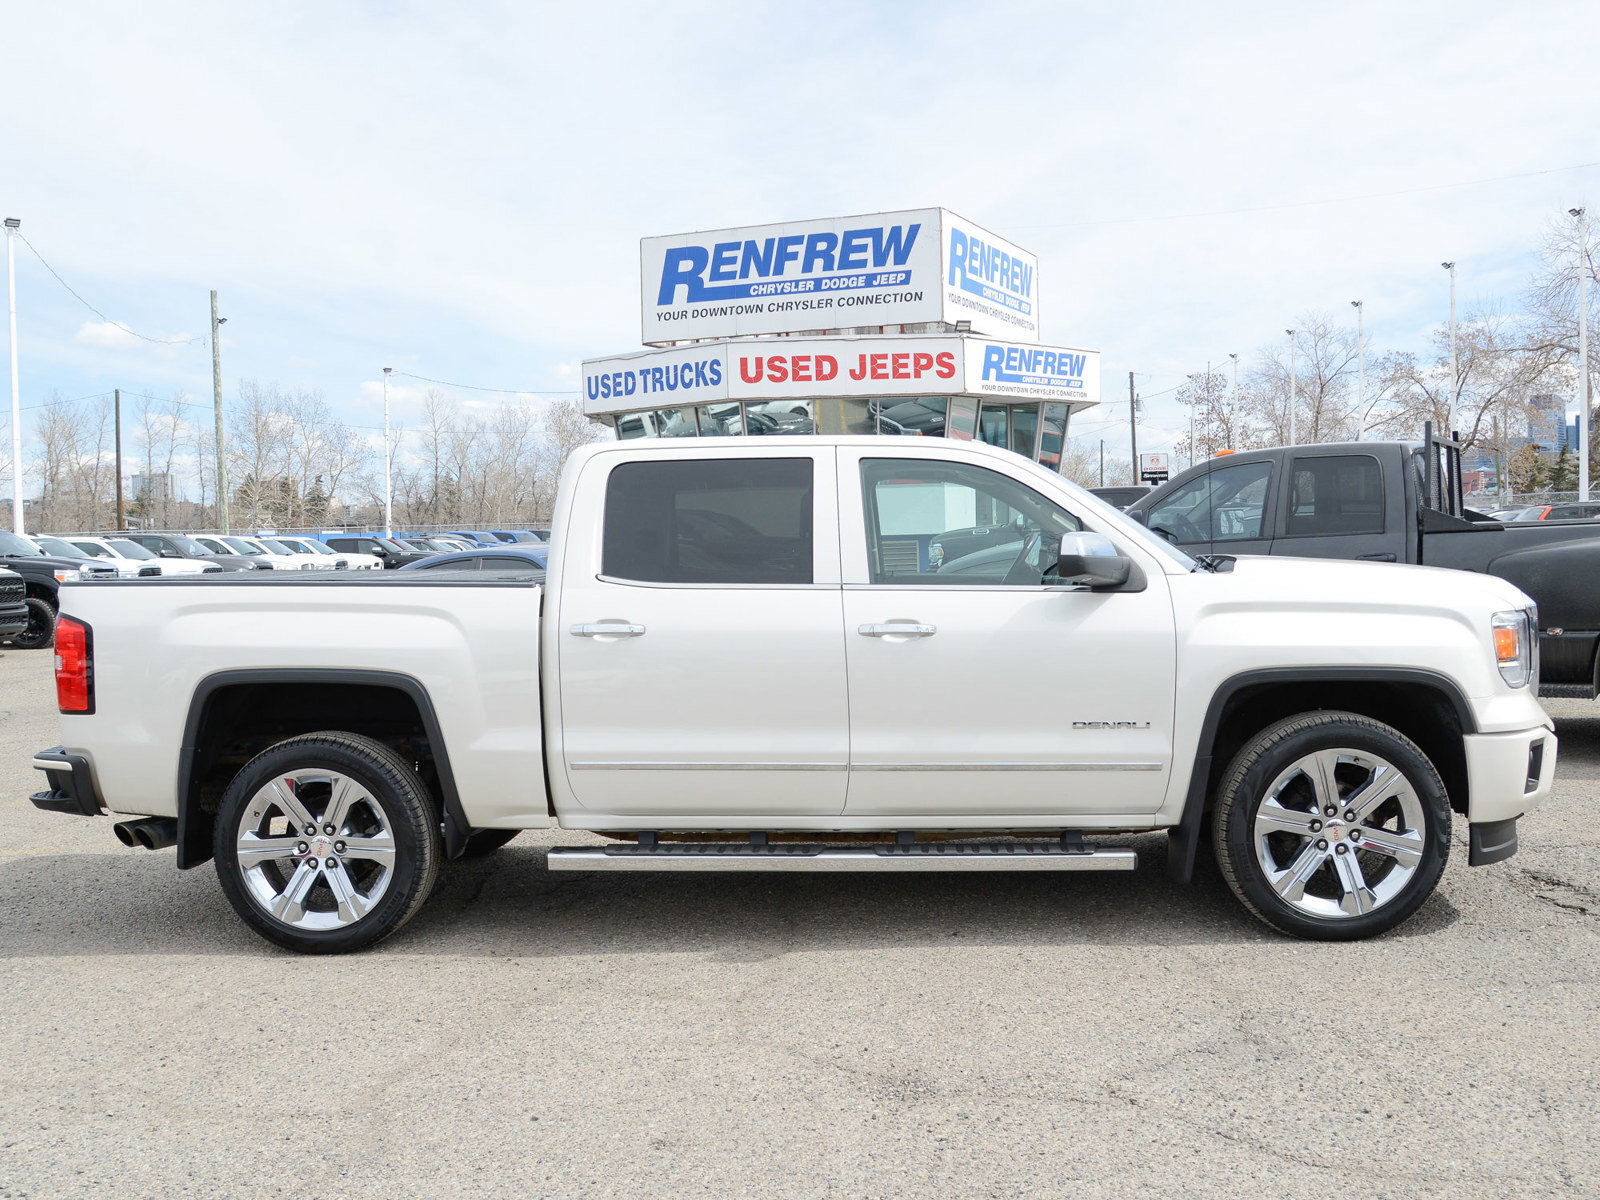 2015 GMC Sierra 1500 Denali - Well Maintained, Excellent Condition!